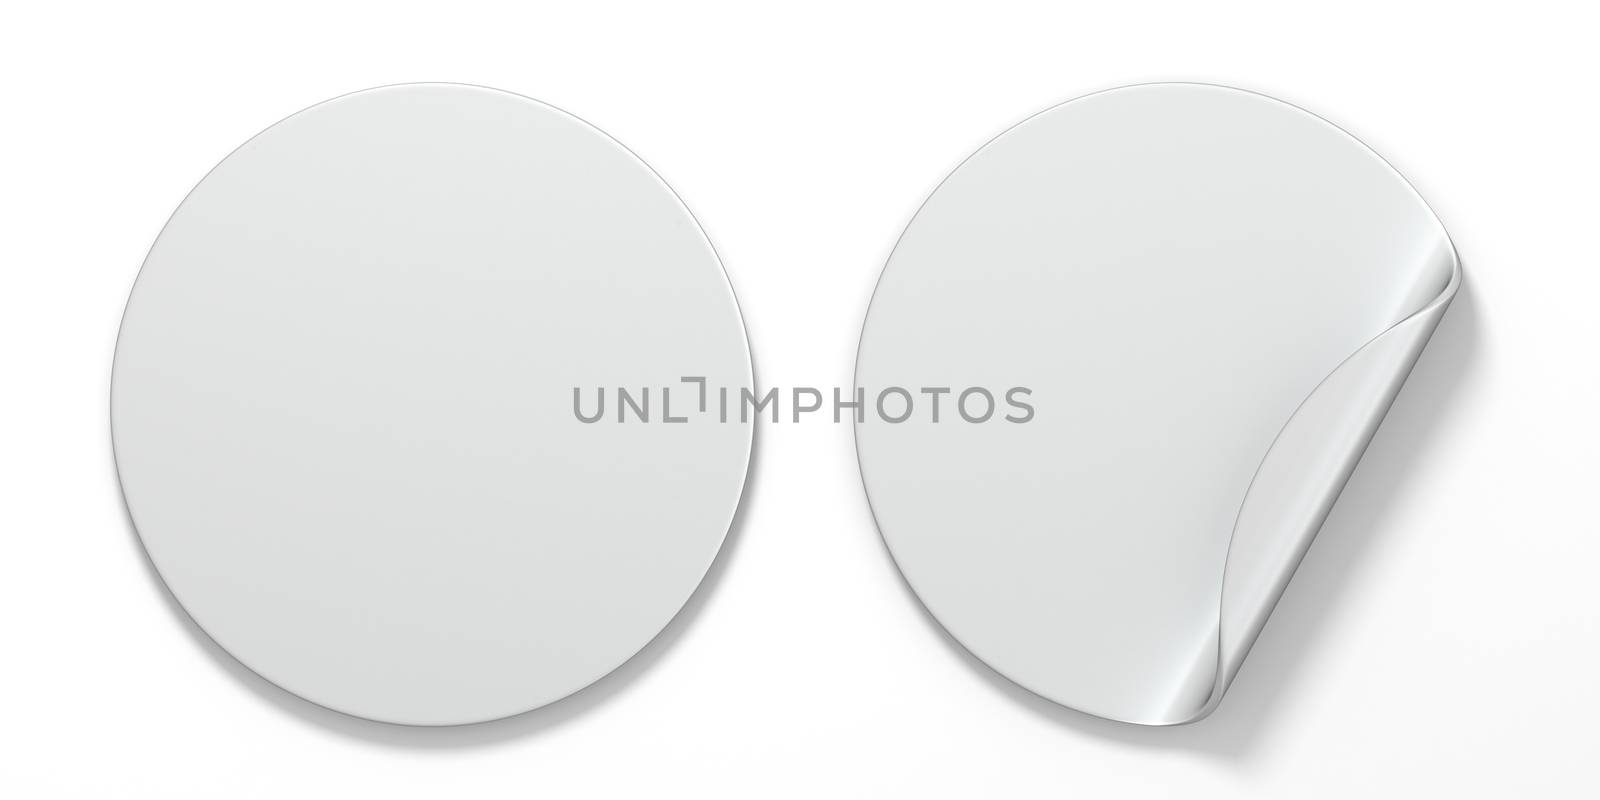 Blank white circle stickers with curved corner 3D render illustration isolated on white background